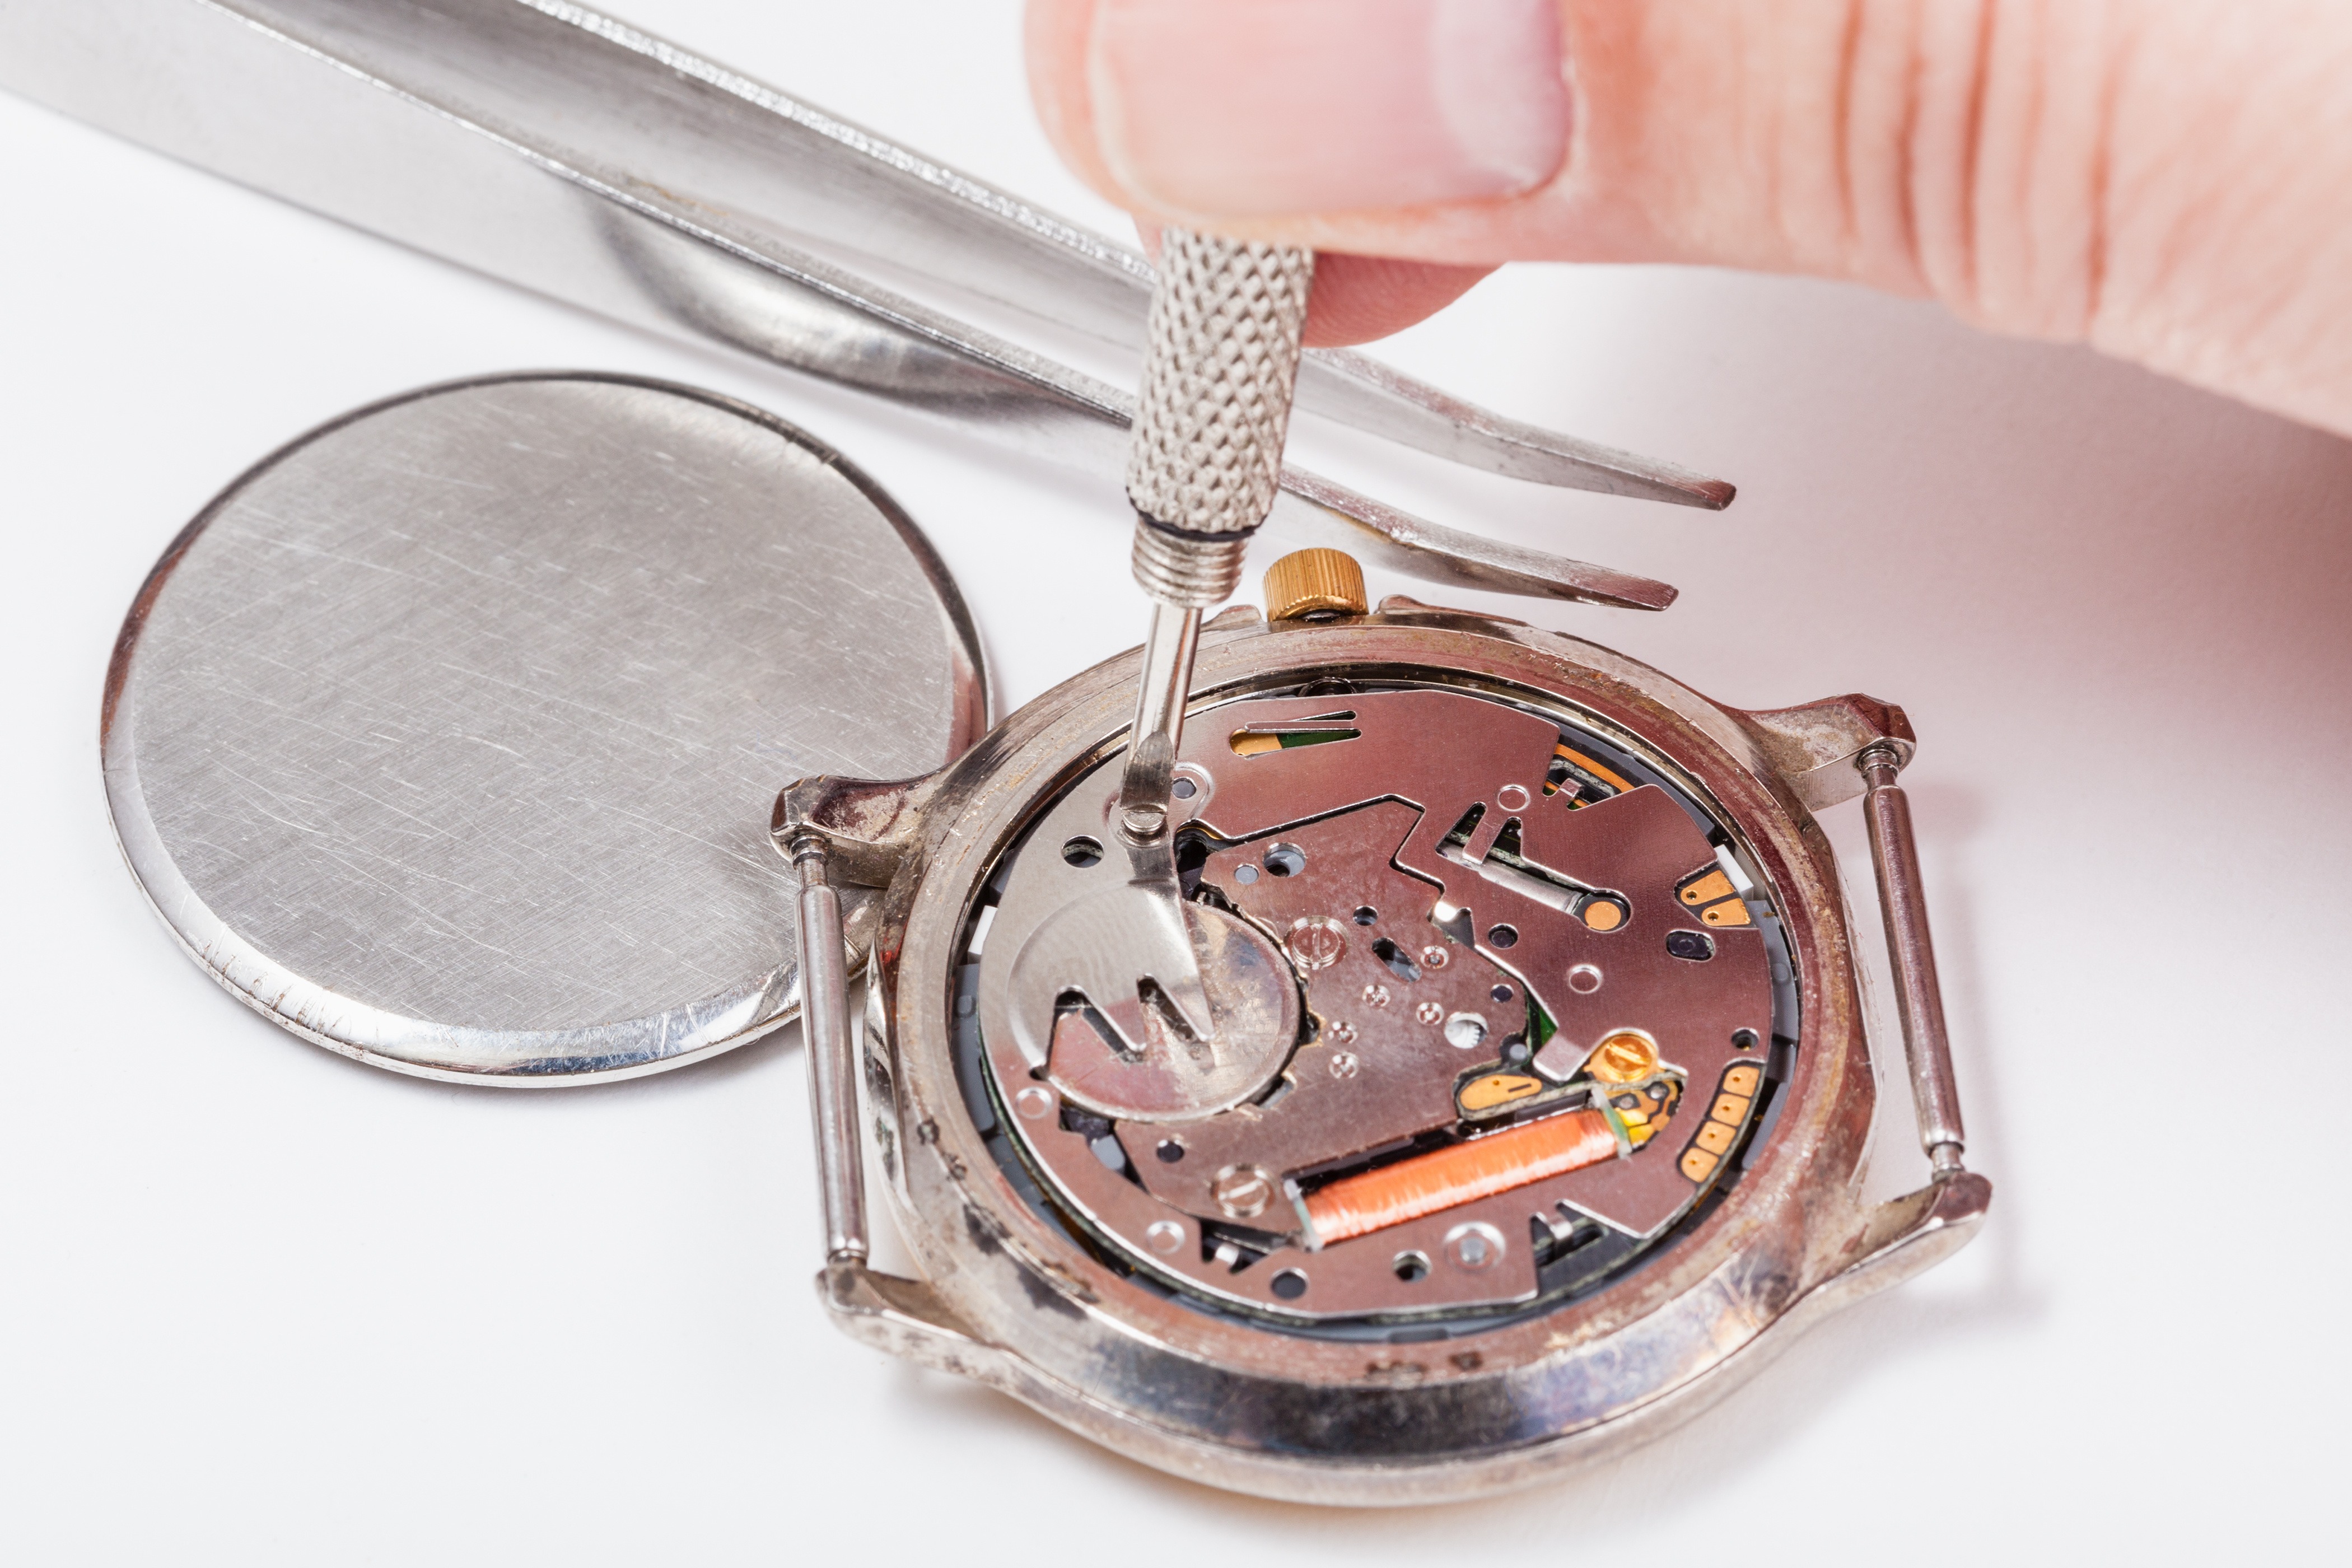 Repairing of watch - watchmaker replaces battery in quartz wristwatch close up